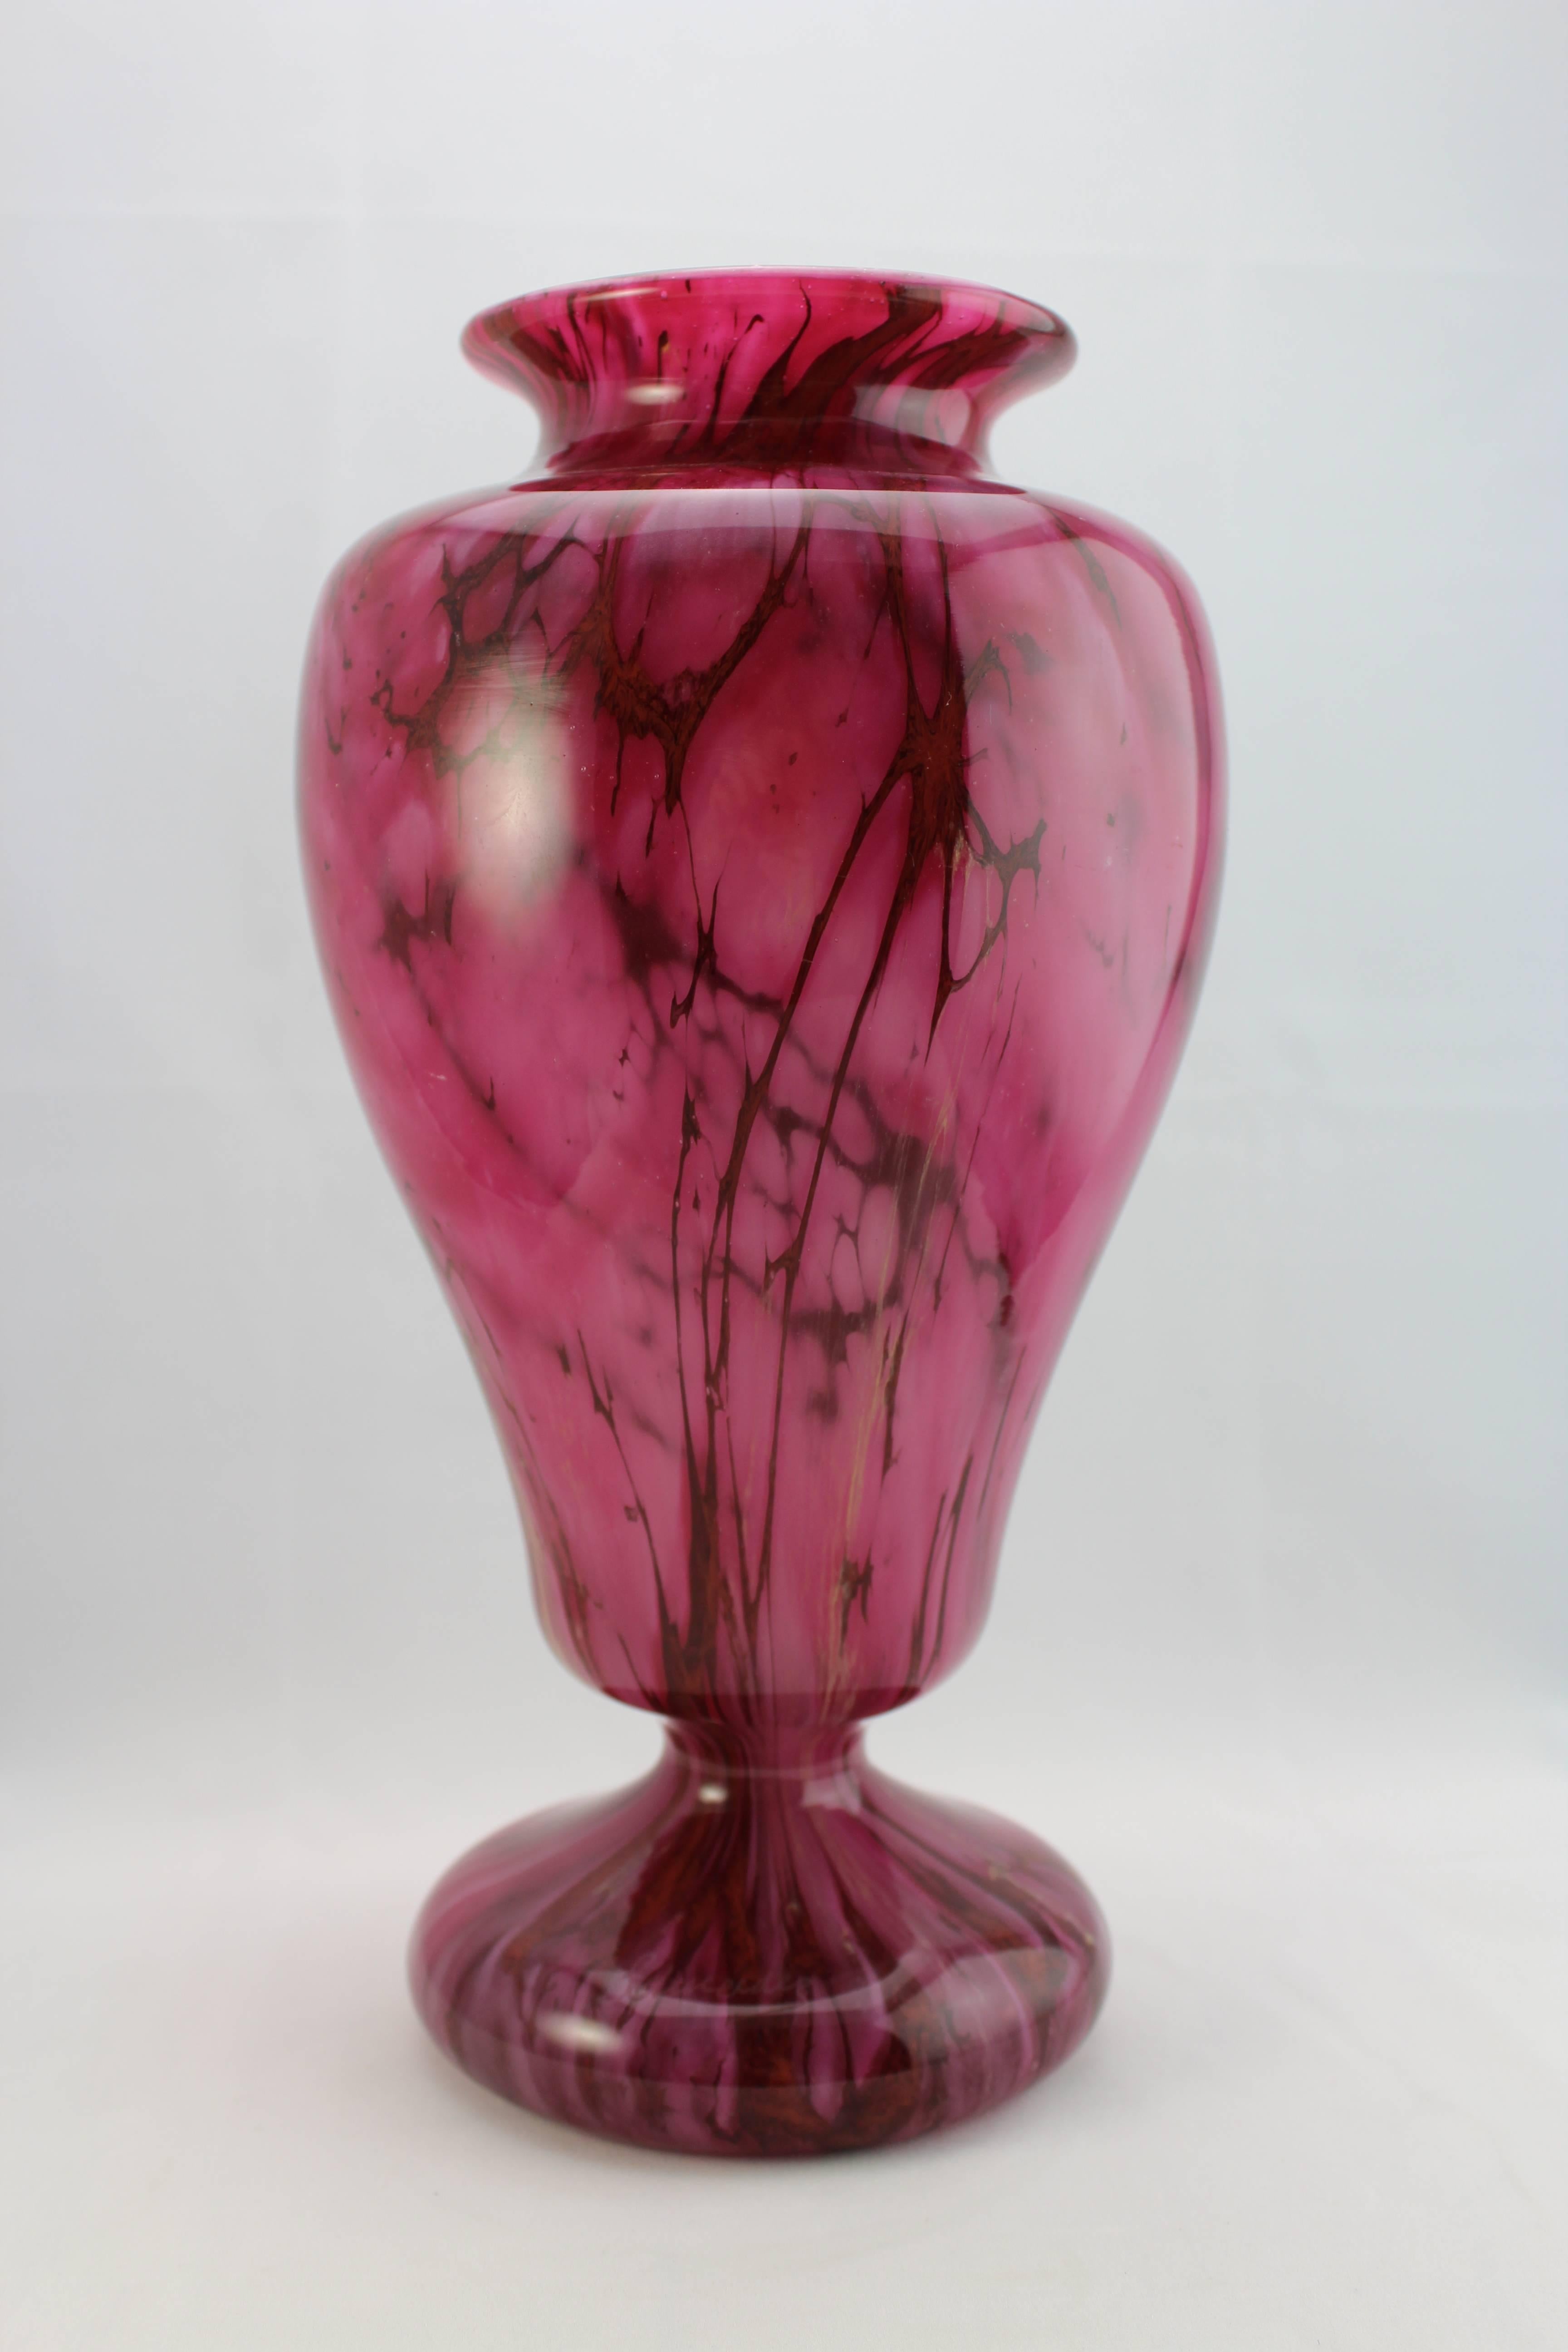 SCHNEIDER Le Verre Francais Veriegated Marble Glass Baluster Vase 
Early 20th century. Engraved Schneider, FRANCE, (artist cipher) 
Ht. 12 in. 

Please also consider Avantiques collection of Daum Nancy, Galle, Loetz, Paul Nicolas, Tiffany and